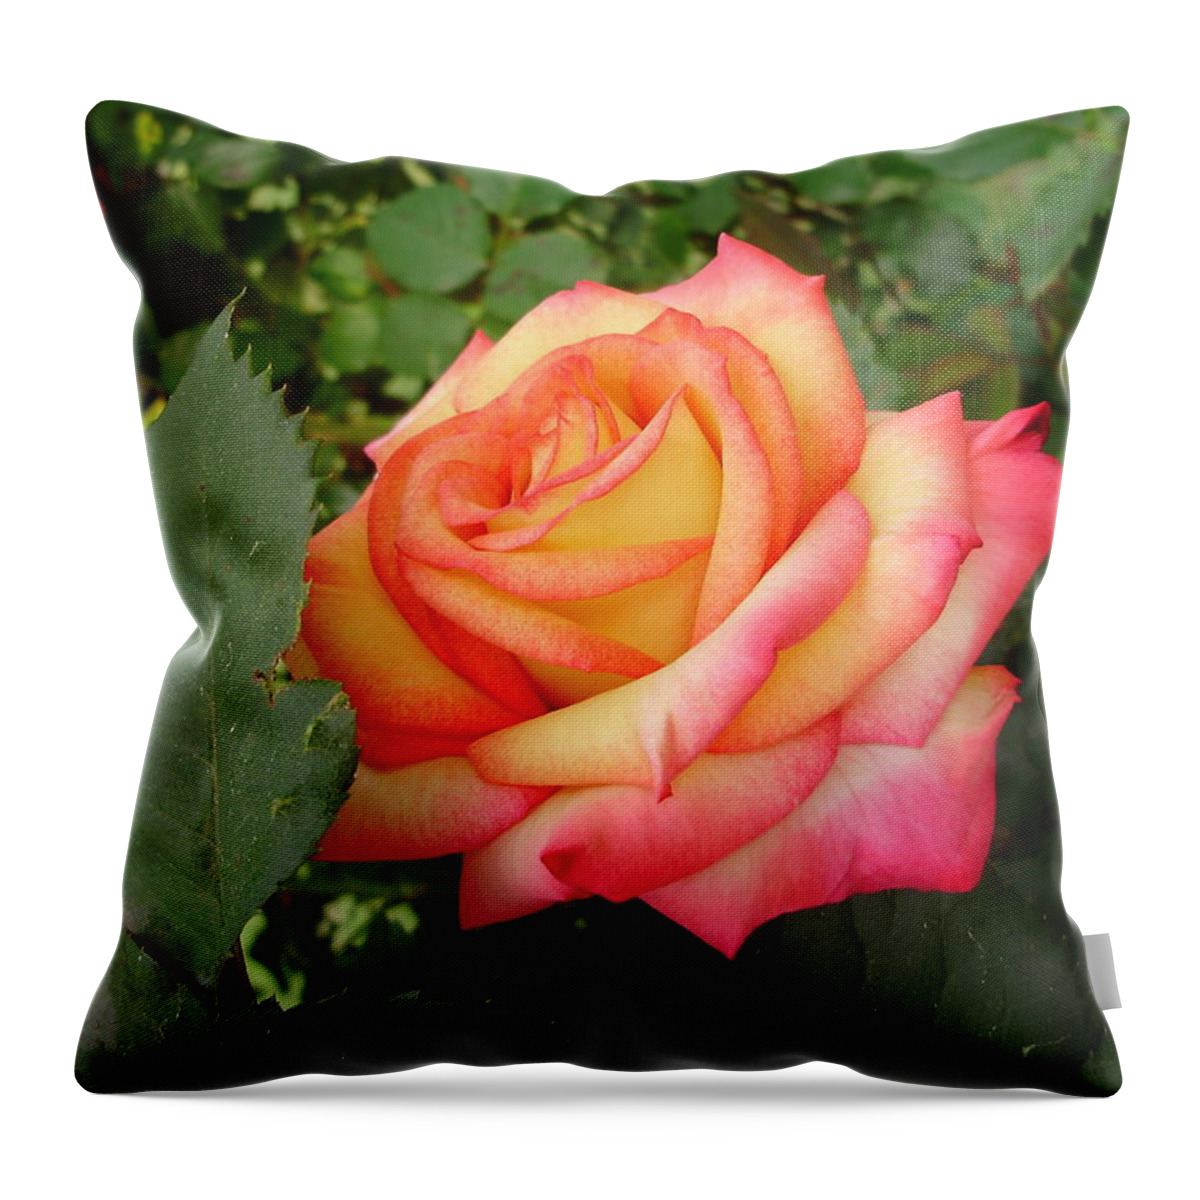 Roses Throw Pillow featuring the photograph Passionate Morning by Anjel B Hartwell